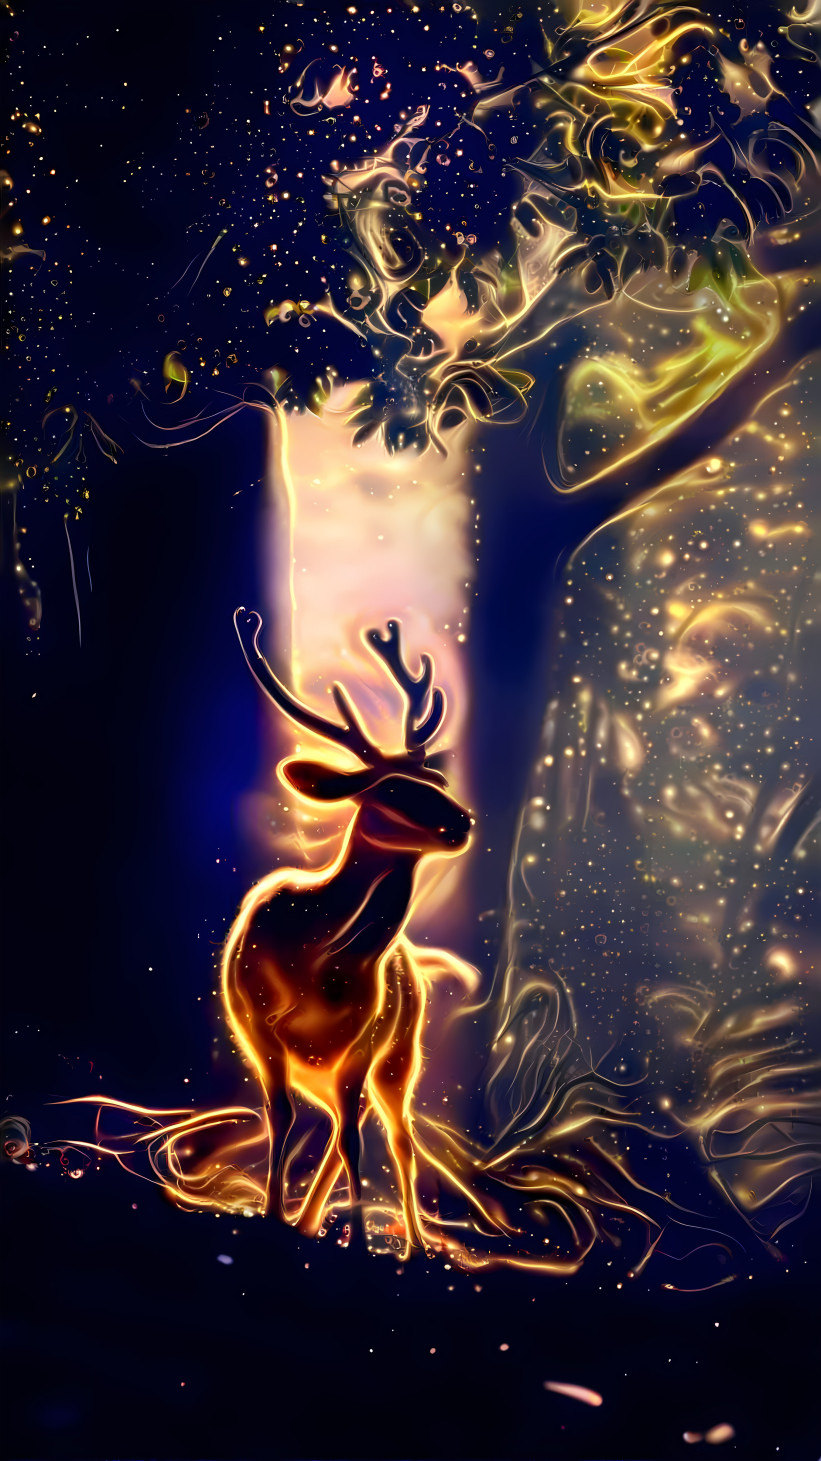 The Golden Stag